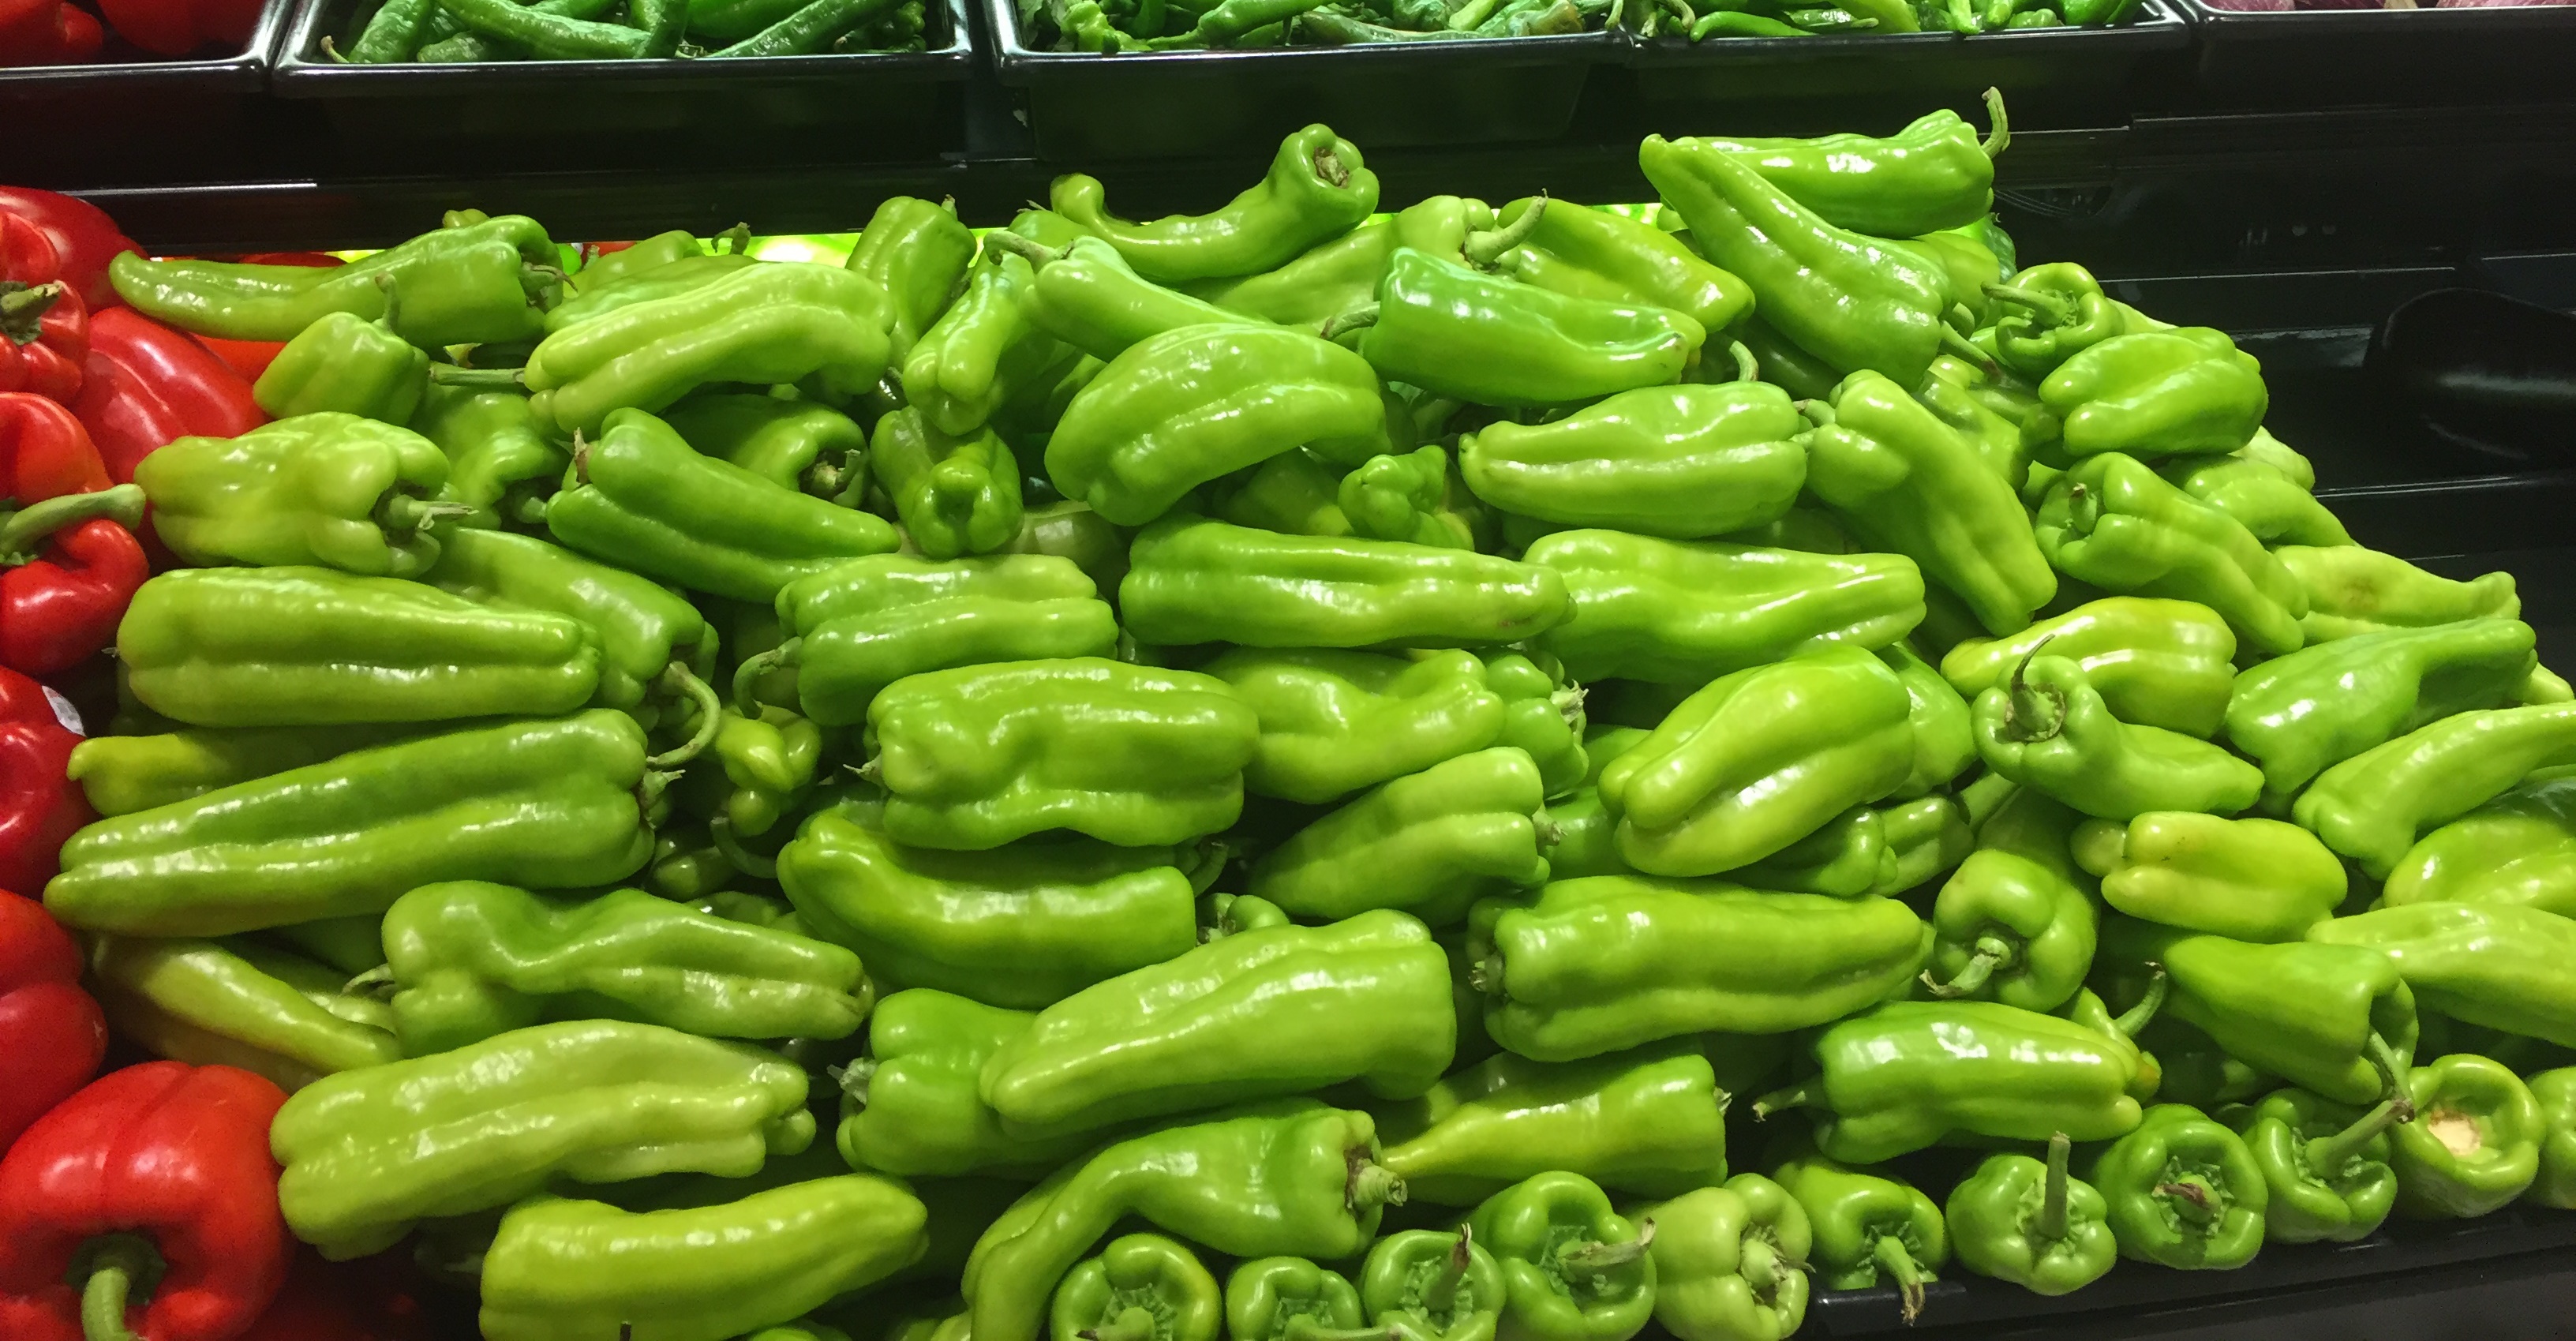 Cubanelle peppers | WorldCrops